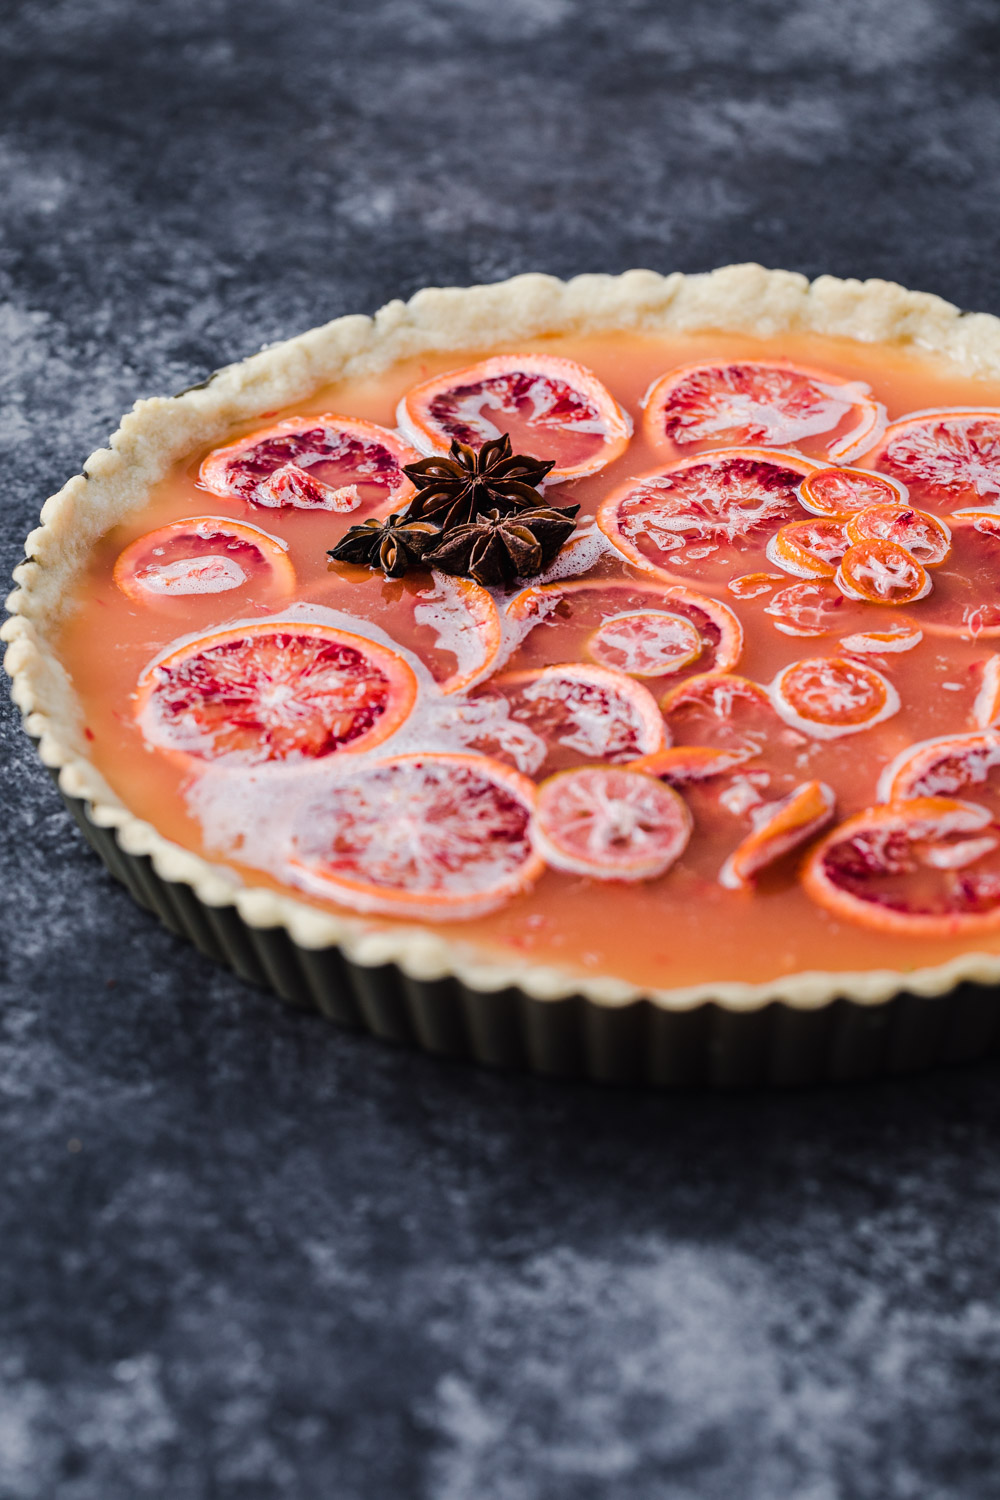 side angle shot of the blood orange and shaker tart with the addition of star anise